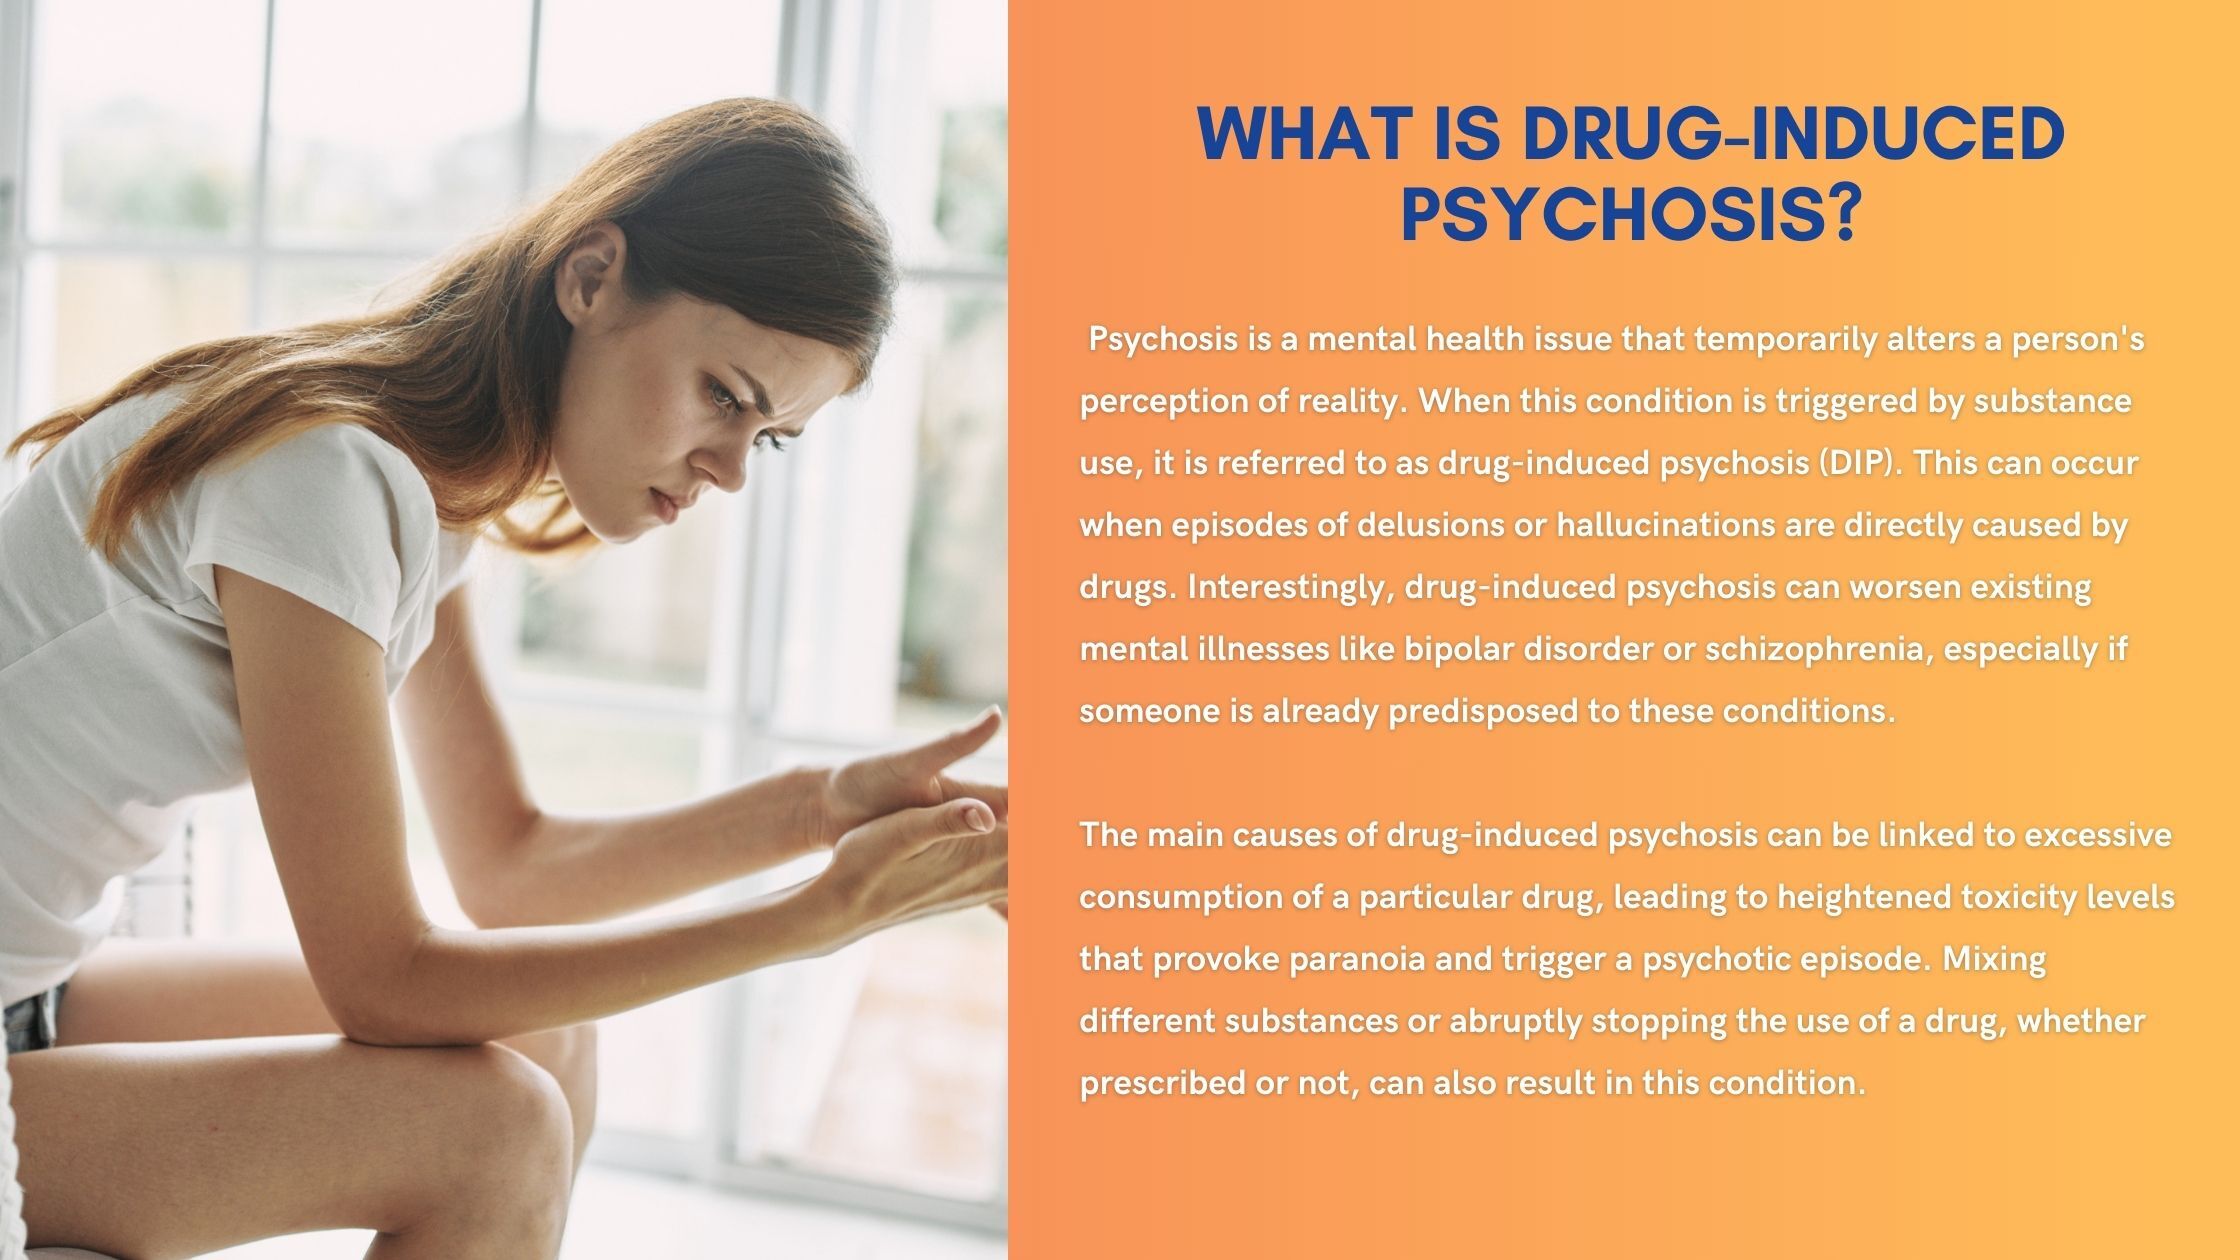 What is Drug-Induced Psychosis?